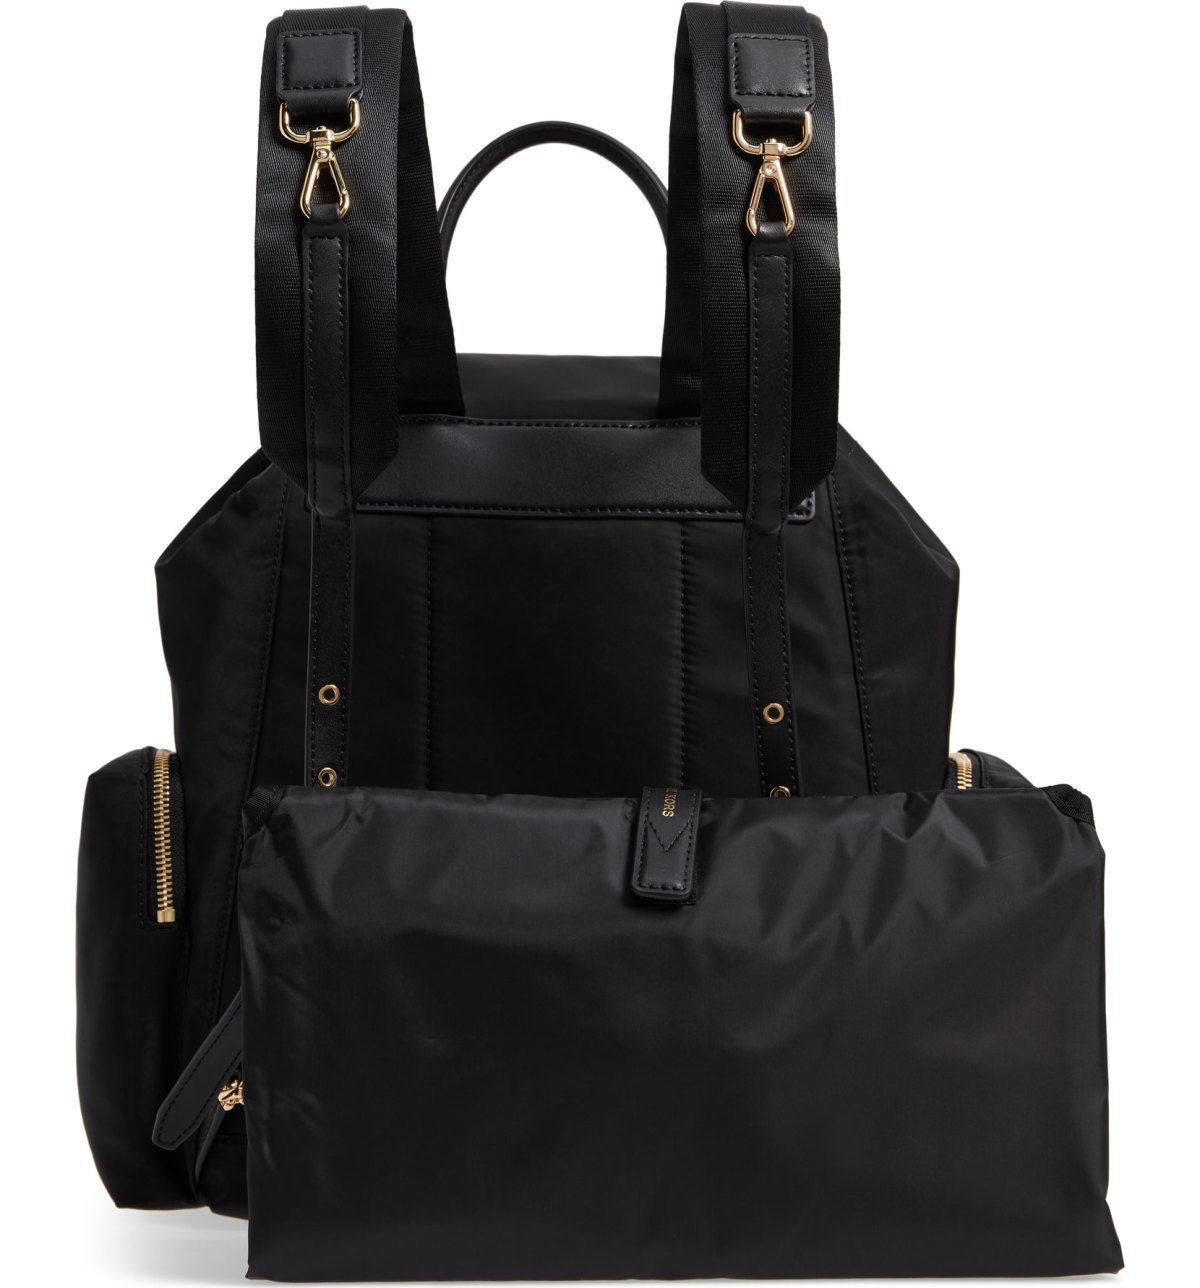 diario abolir Lechuguilla This Michael Kors Backpack Is Actually a Stylish Diaper Bag